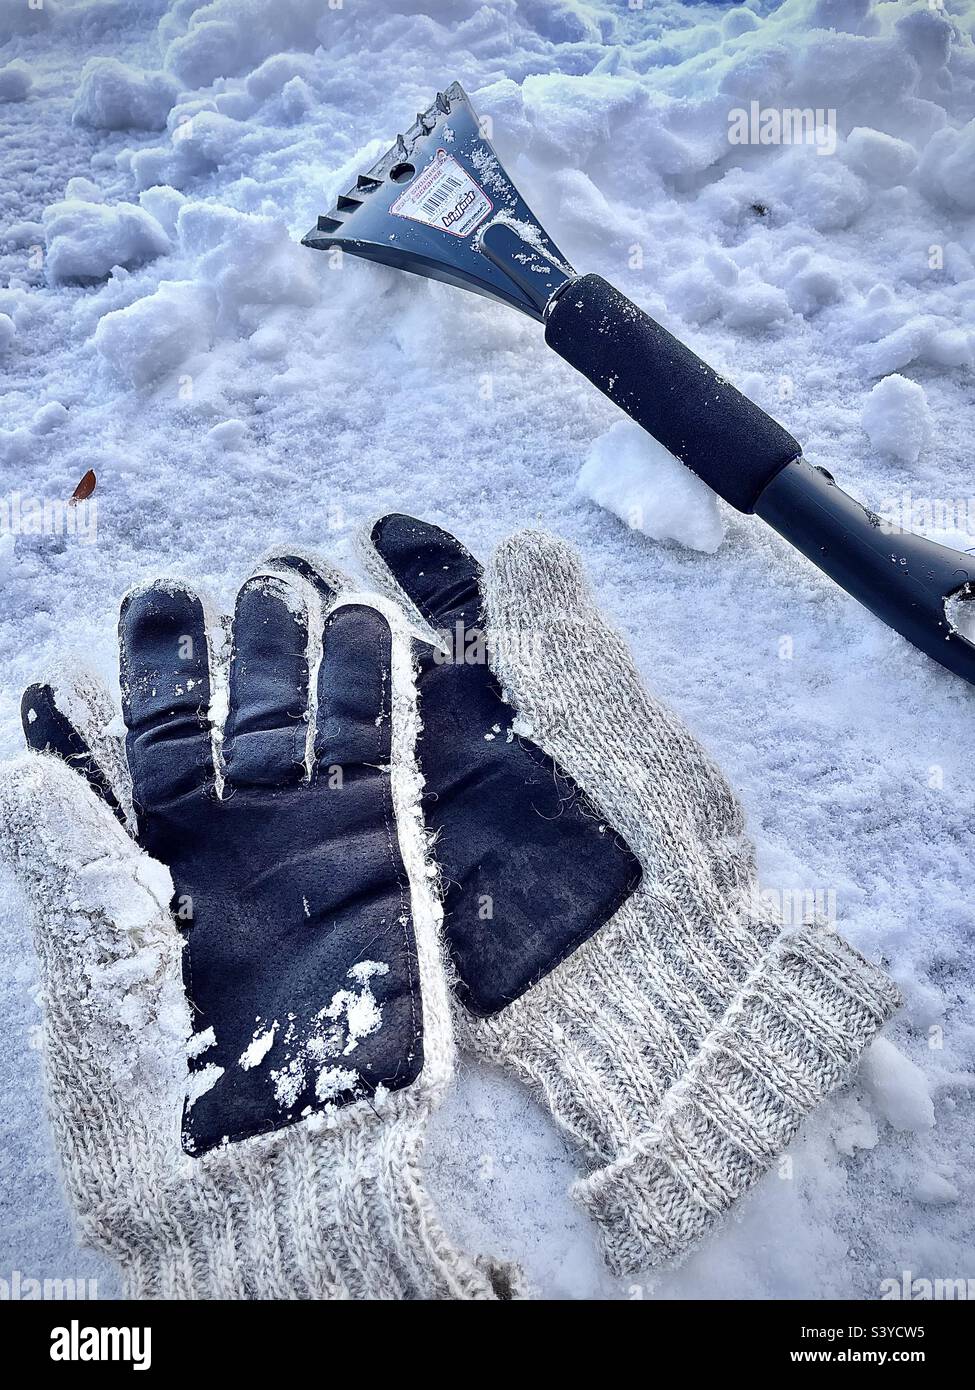 A pair of wool gloves and a snow/ice tool, one end an ice scraper, the other end a snow brush. A wintry still life set upon a snow covered car hood after a Utah, USA snowstorm. Stock Photo